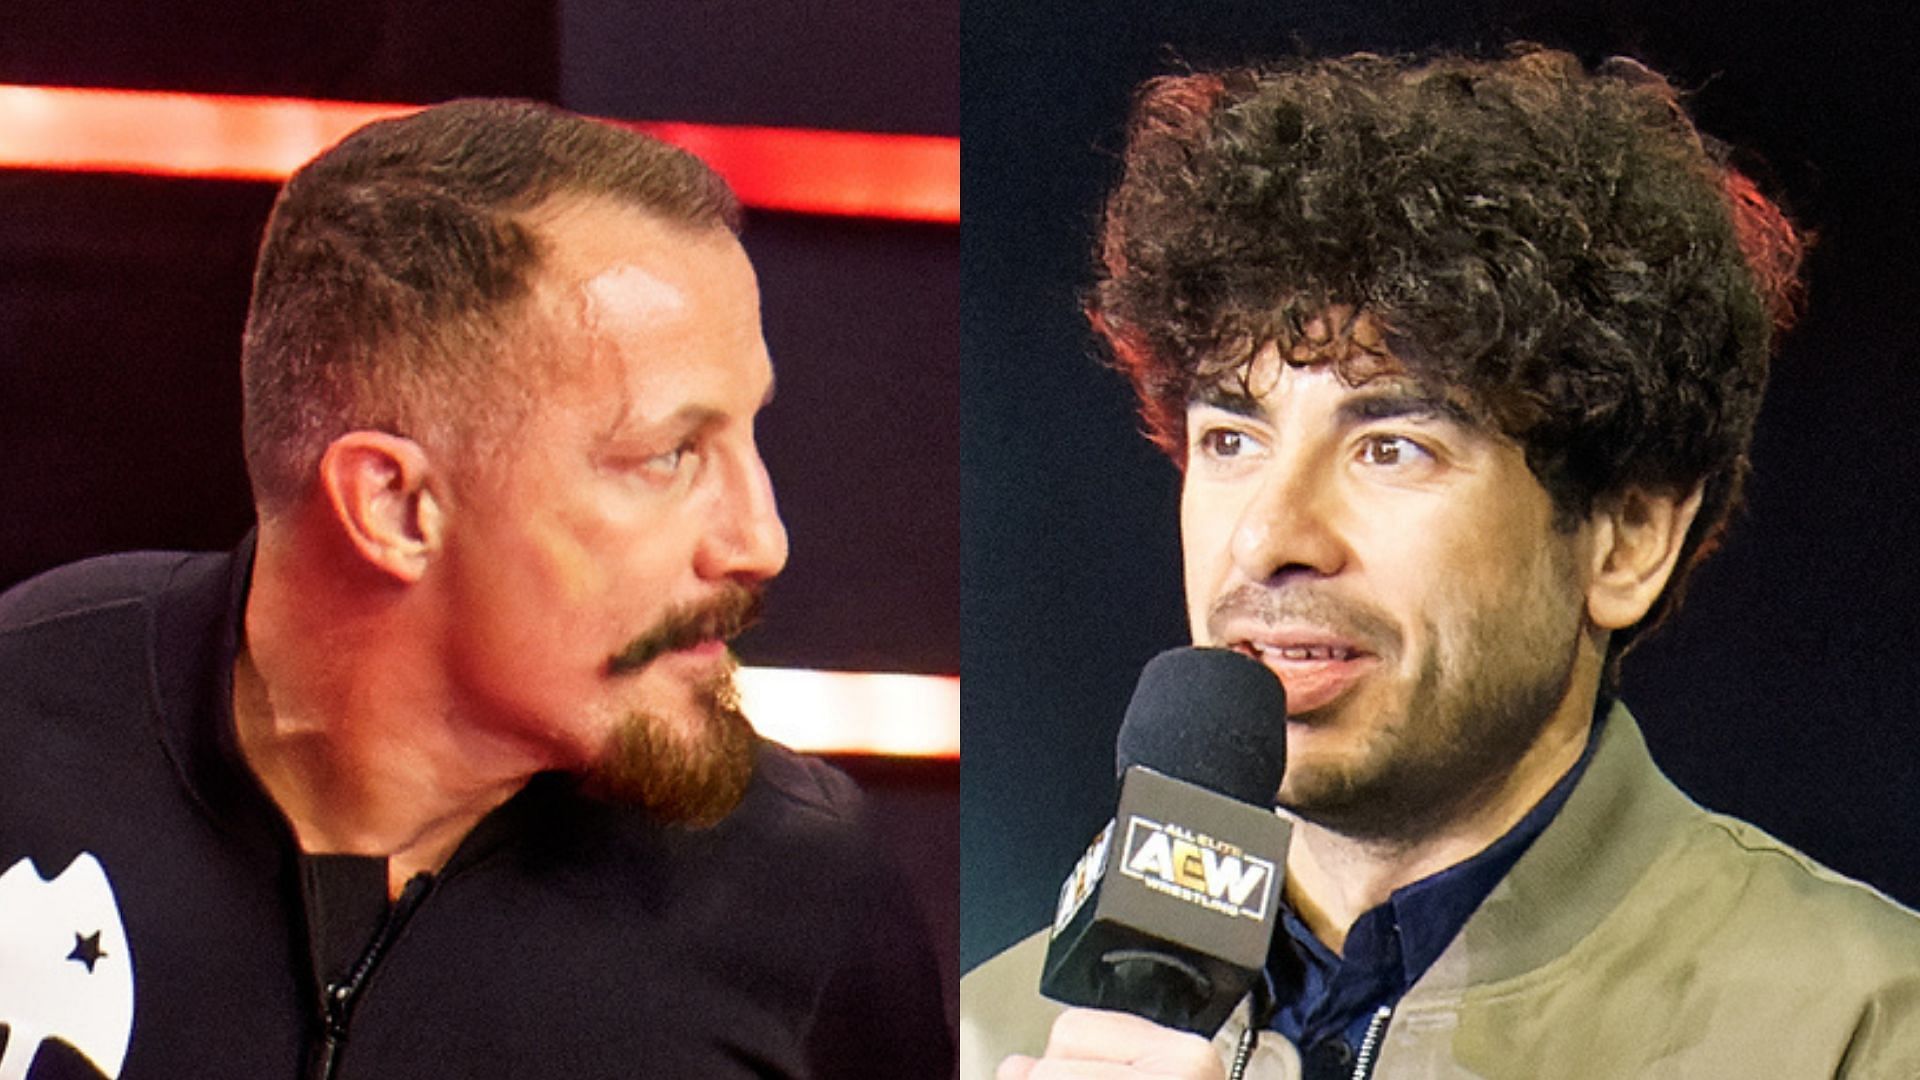 Bobby Fish has opened up about how he feels about Tony Khan